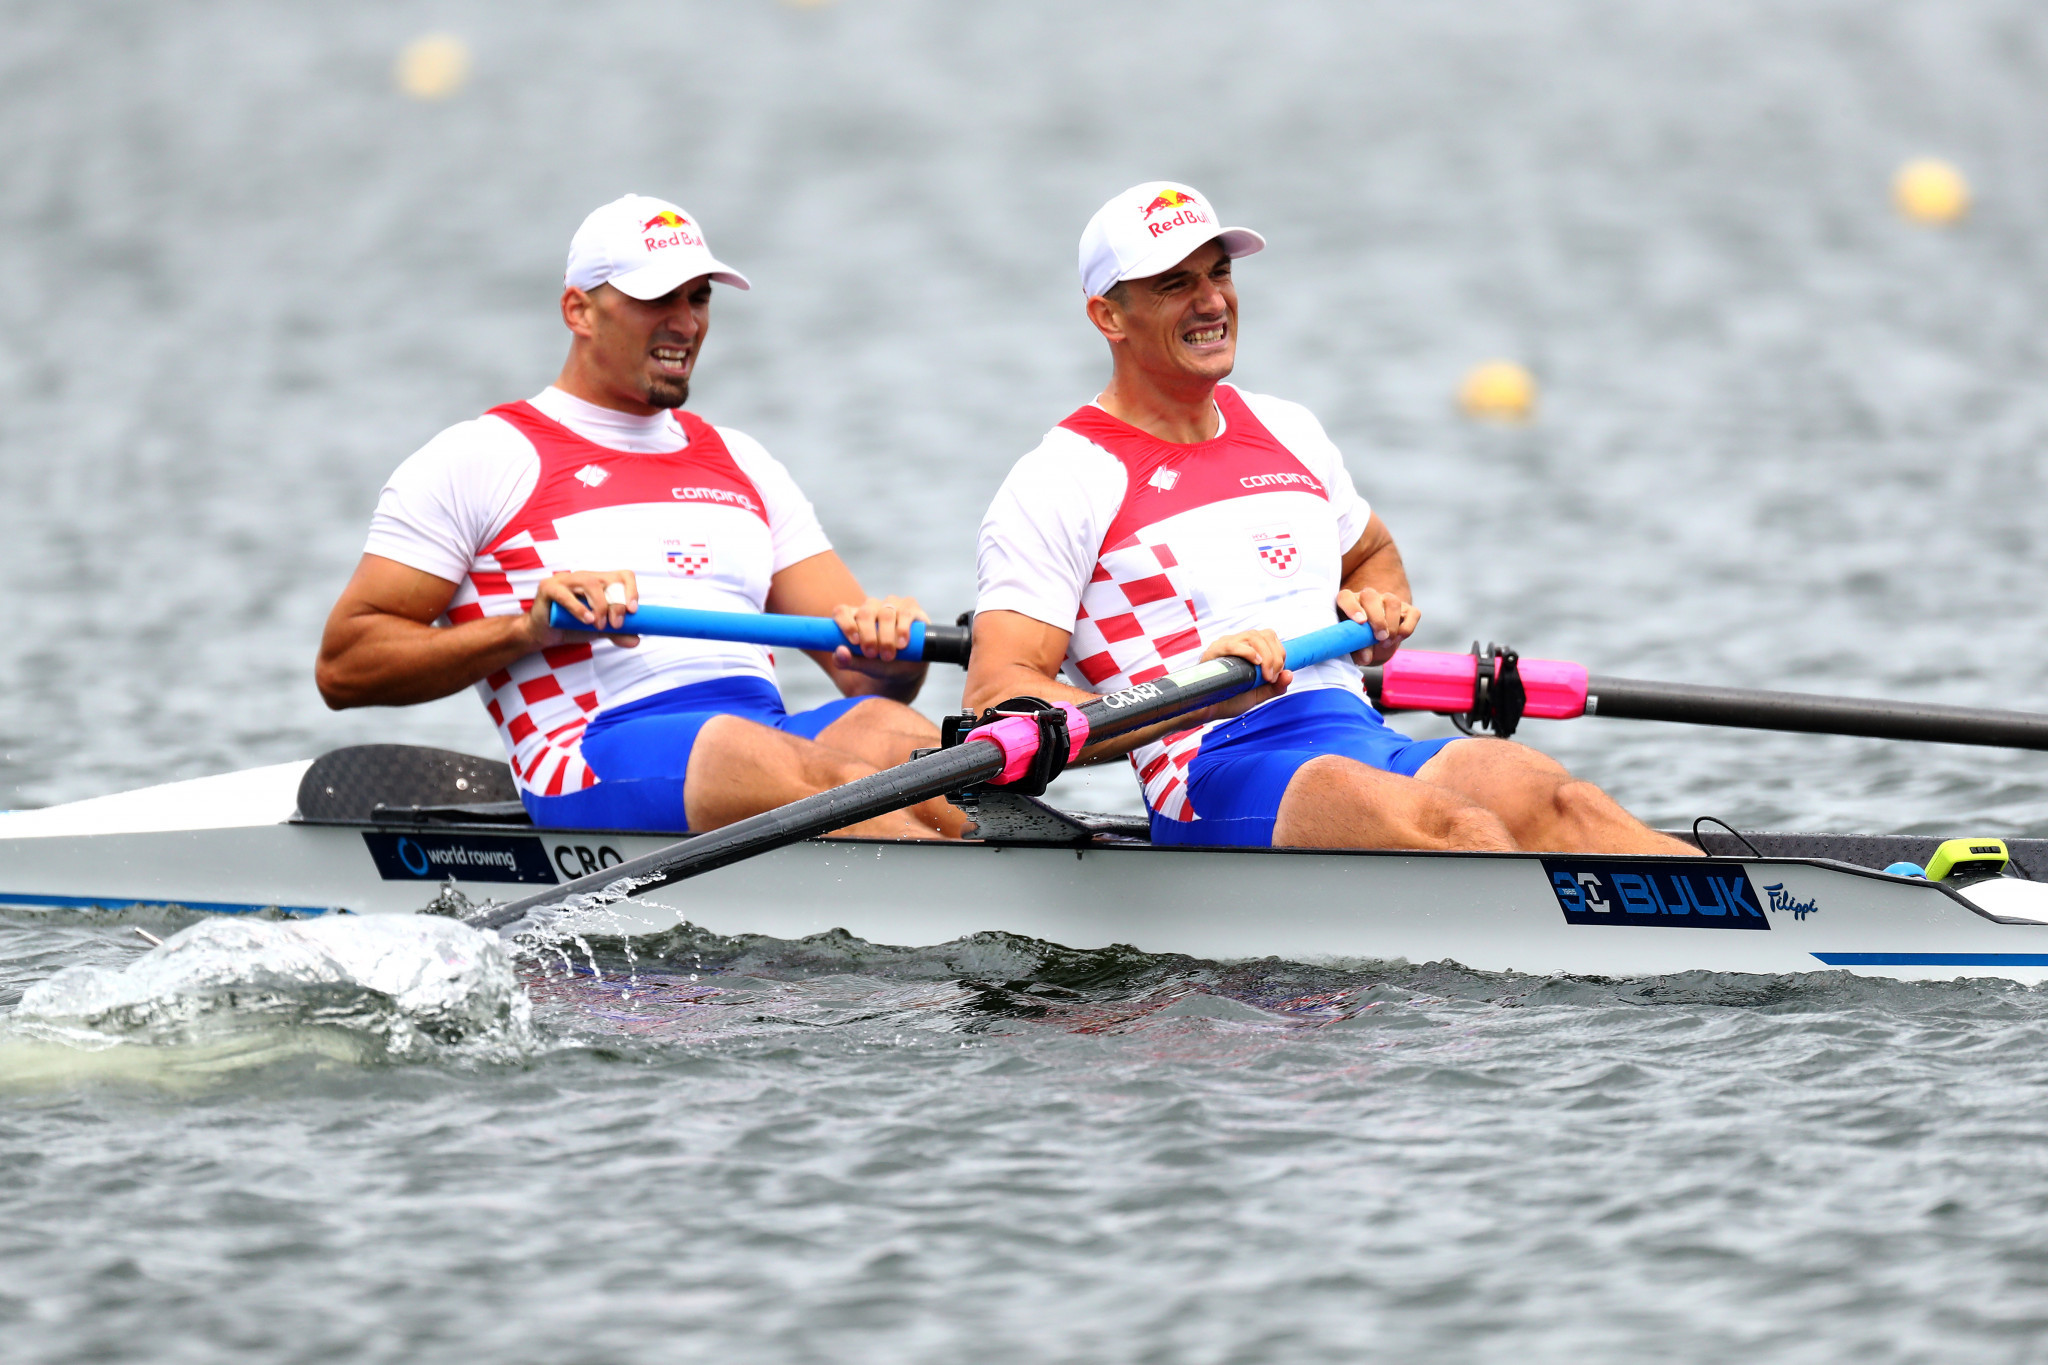 Martin and Valent Sinković of Croatia topped their heat in the men's pairs at the World Rowing Championships ©Getty Images